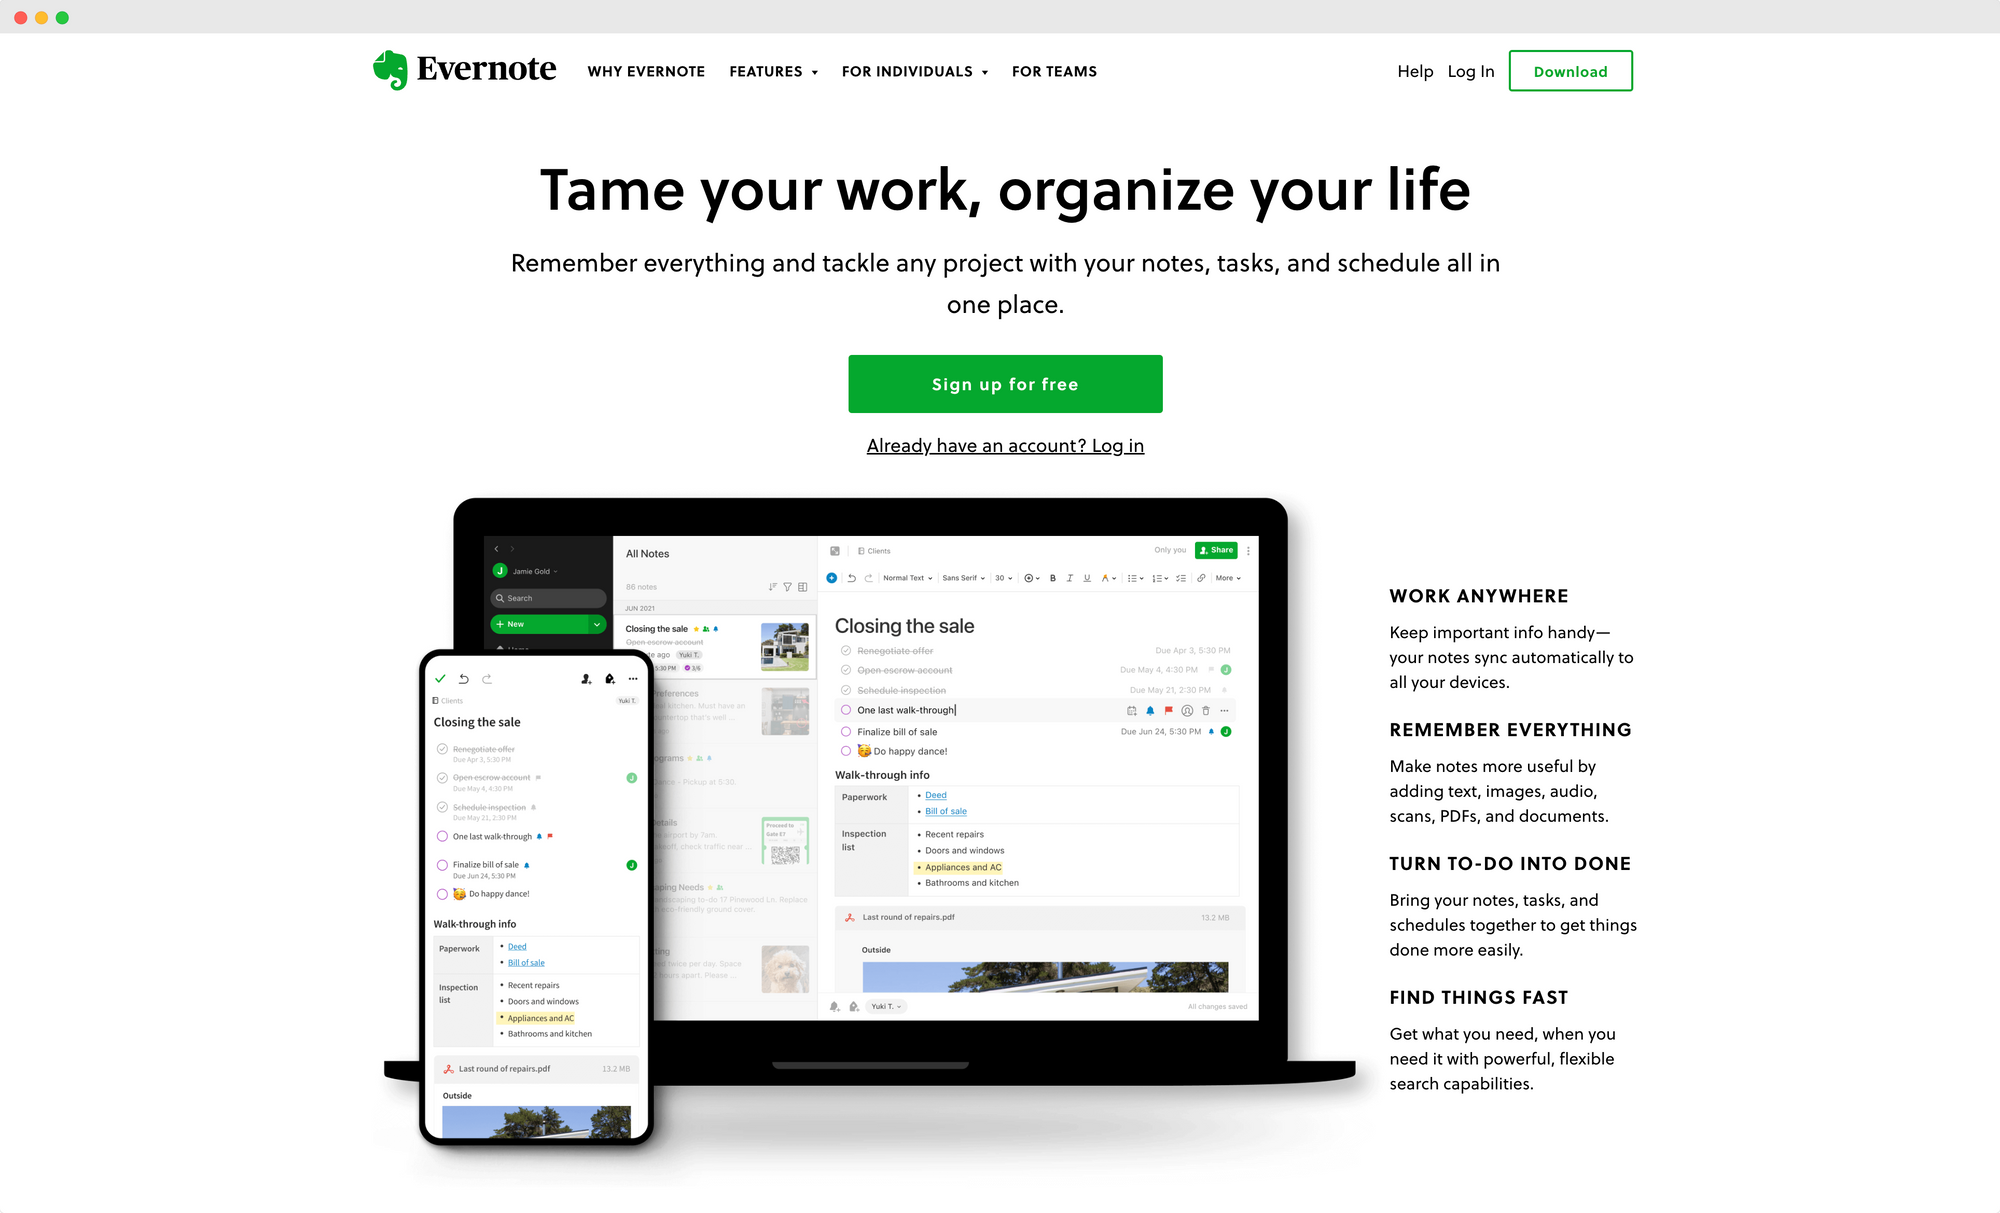 Evernote homepage showcasing organizational tools for notes and tasks